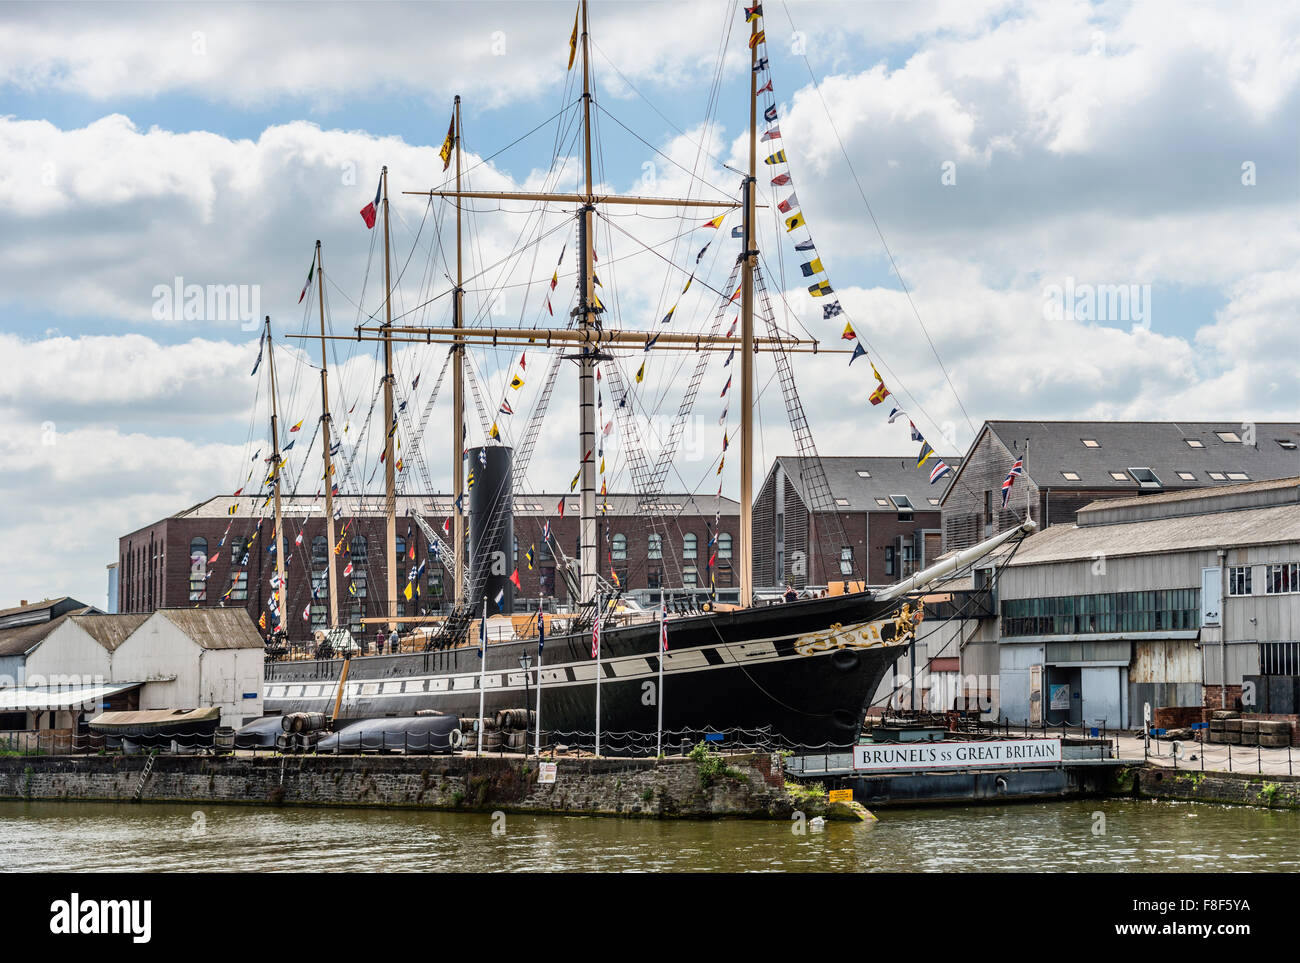 Brunels SS Great Britain is a museum ship and former passenger steamship at Bristol Harbor, Somerset, England, UK Stock Photo